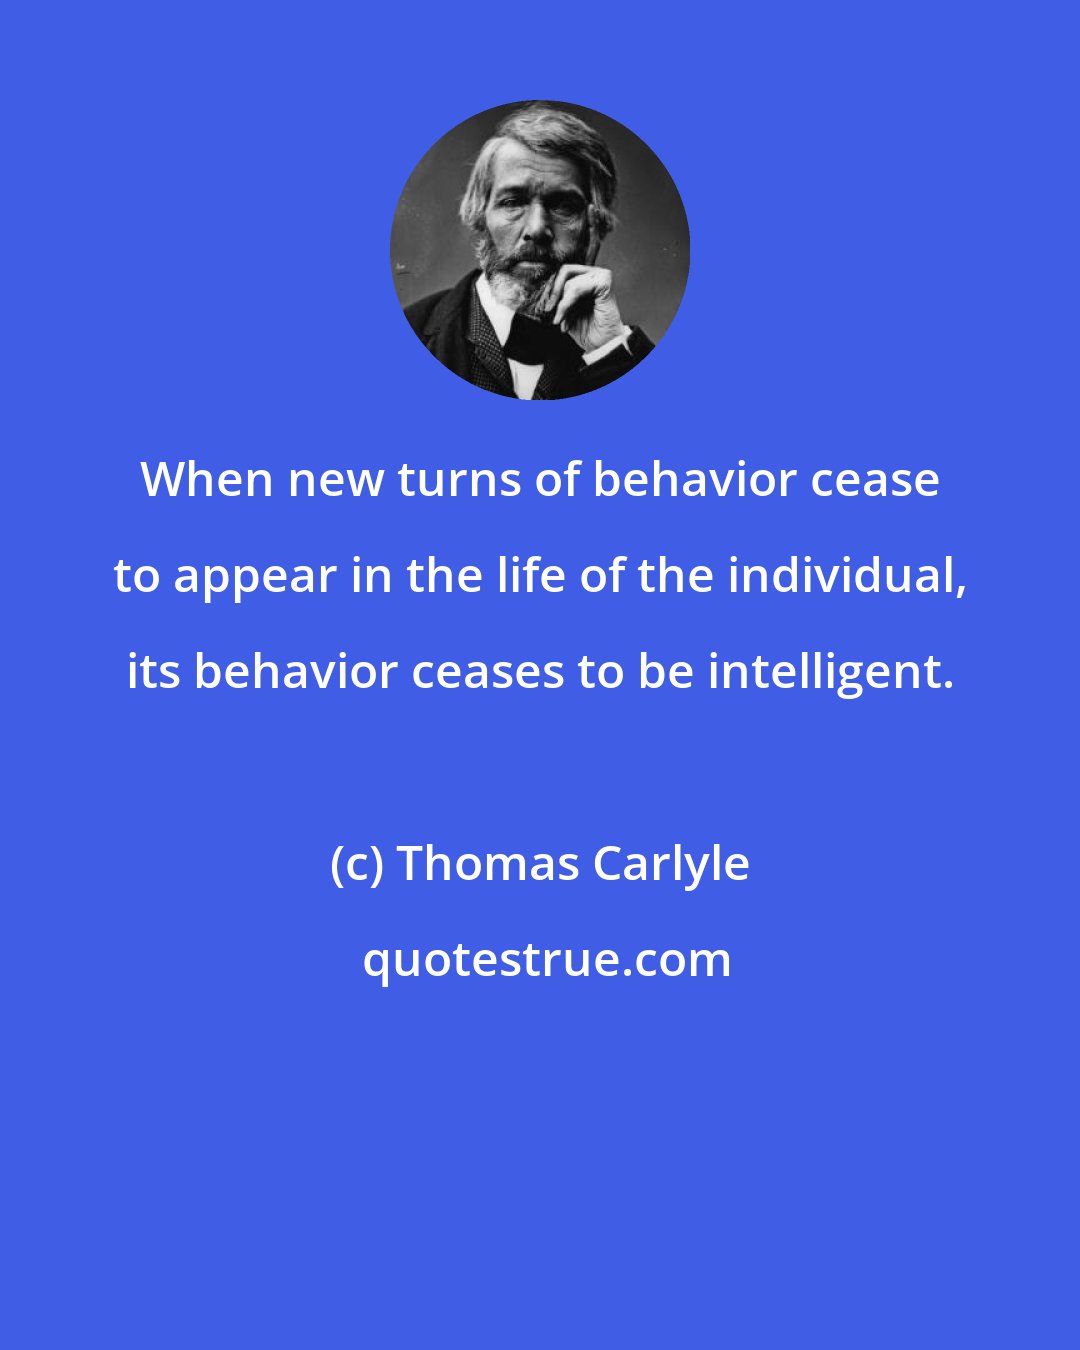 Thomas Carlyle: When new turns of behavior cease to appear in the life of the individual, its behavior ceases to be intelligent.